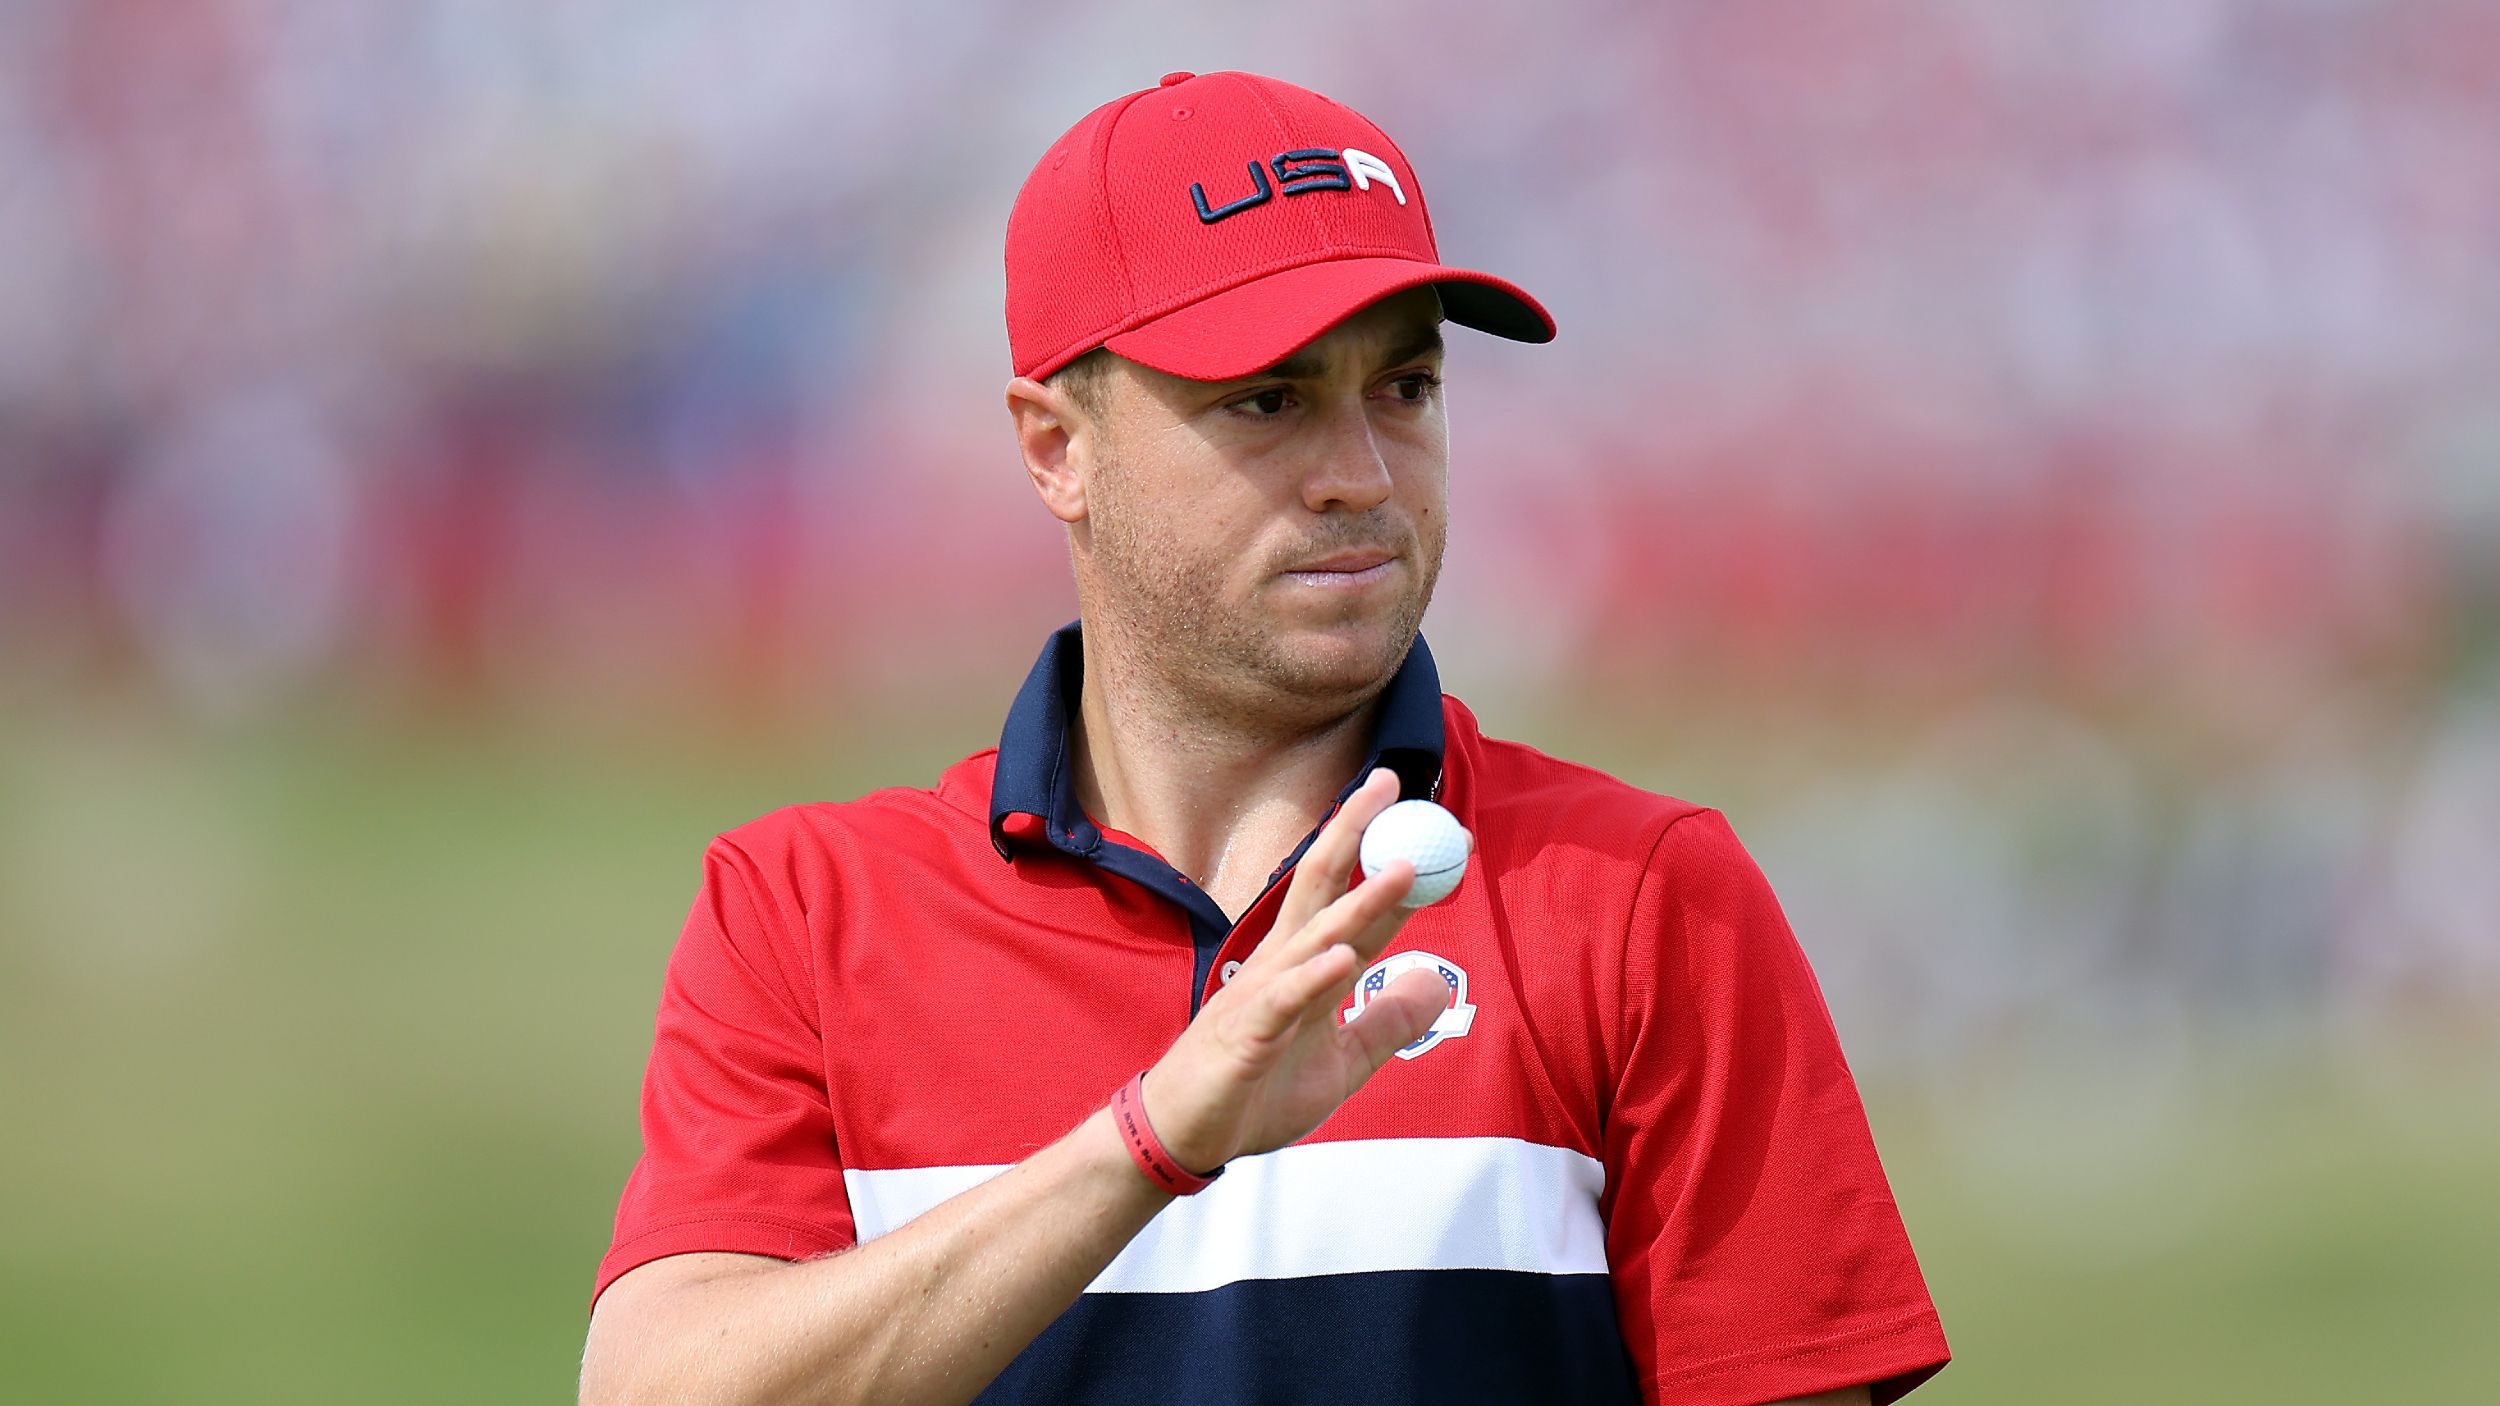 What Is Justin Thomas’ Ryder Cup Record?